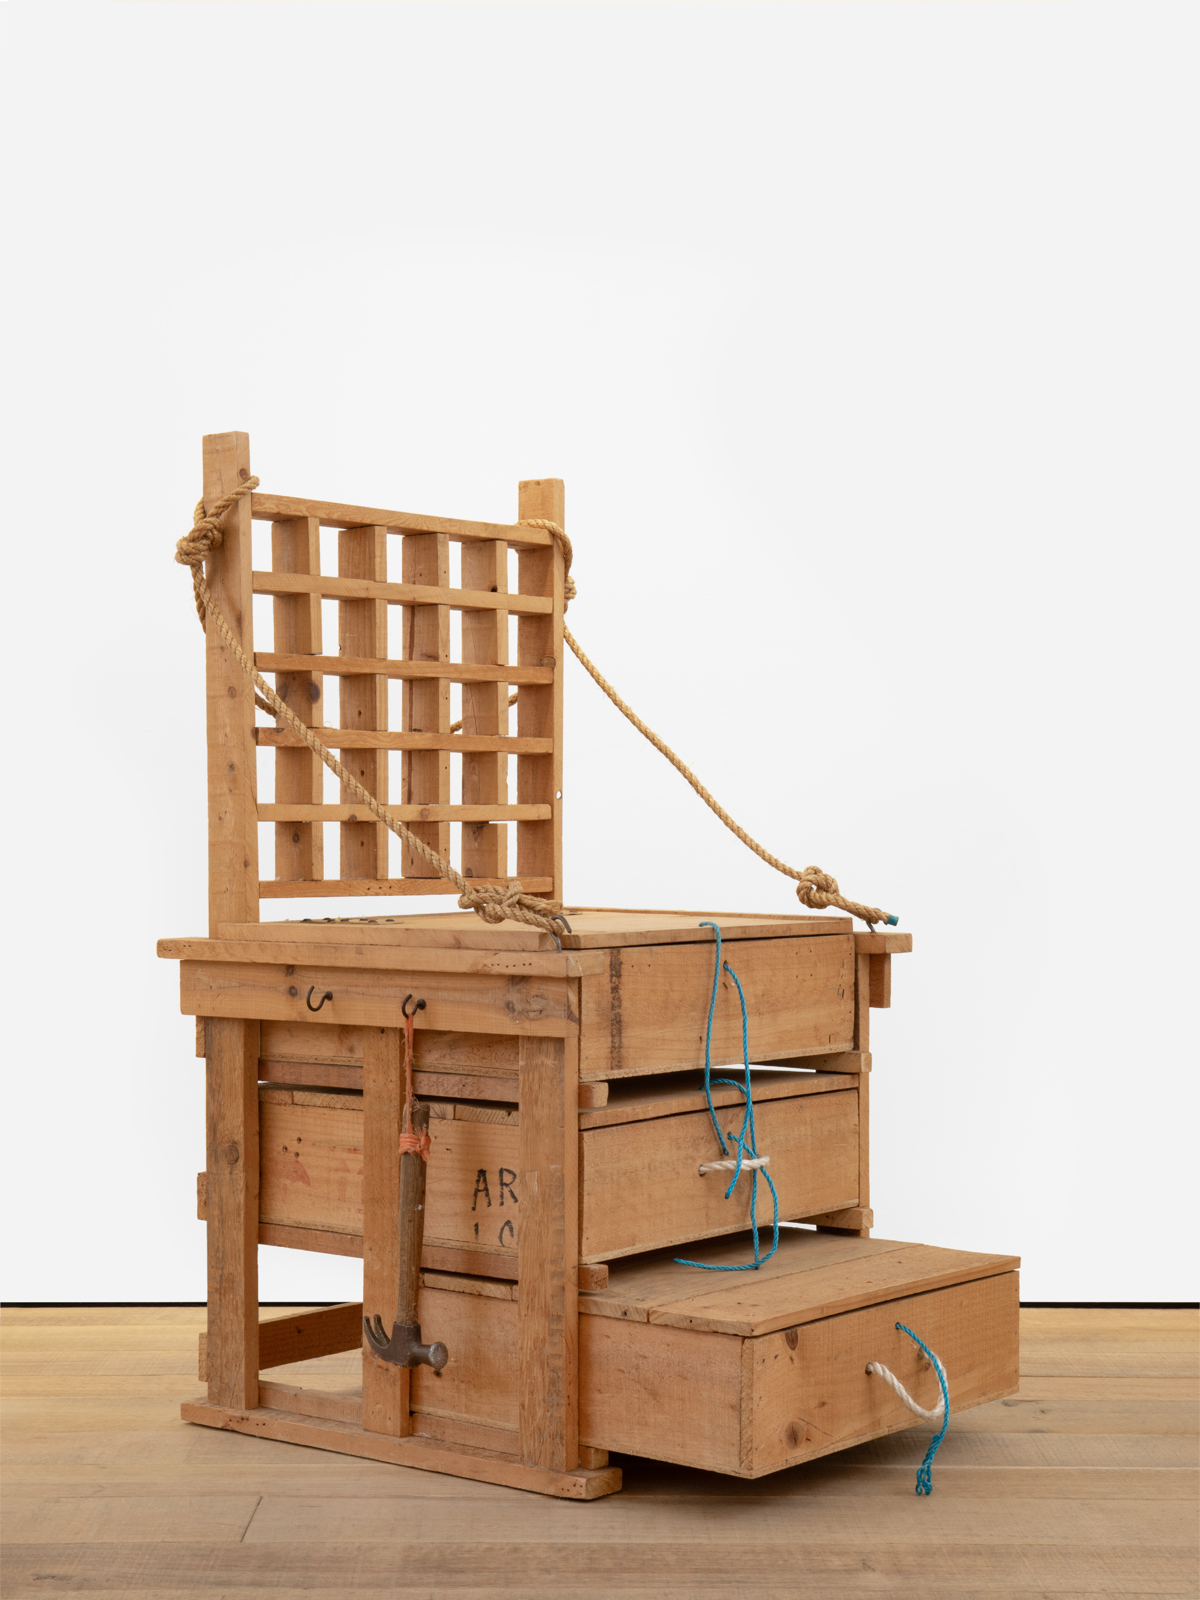 The Wick - Eduardo Paolozzi
Sculptor’s Chair, 1985-1987
salvaged and re-purposed materials including pine, beech, rope, linen, nylon cord, metal hooks and
nails, together with a hammer
unique
46.5 x 24.75 x 22.50 in (108 x 63 x 57 cm) © Eduardo Paolozzi, courtesy Simon Andrews and Sadie Coles HQ, London.Photo: Katie Morrison